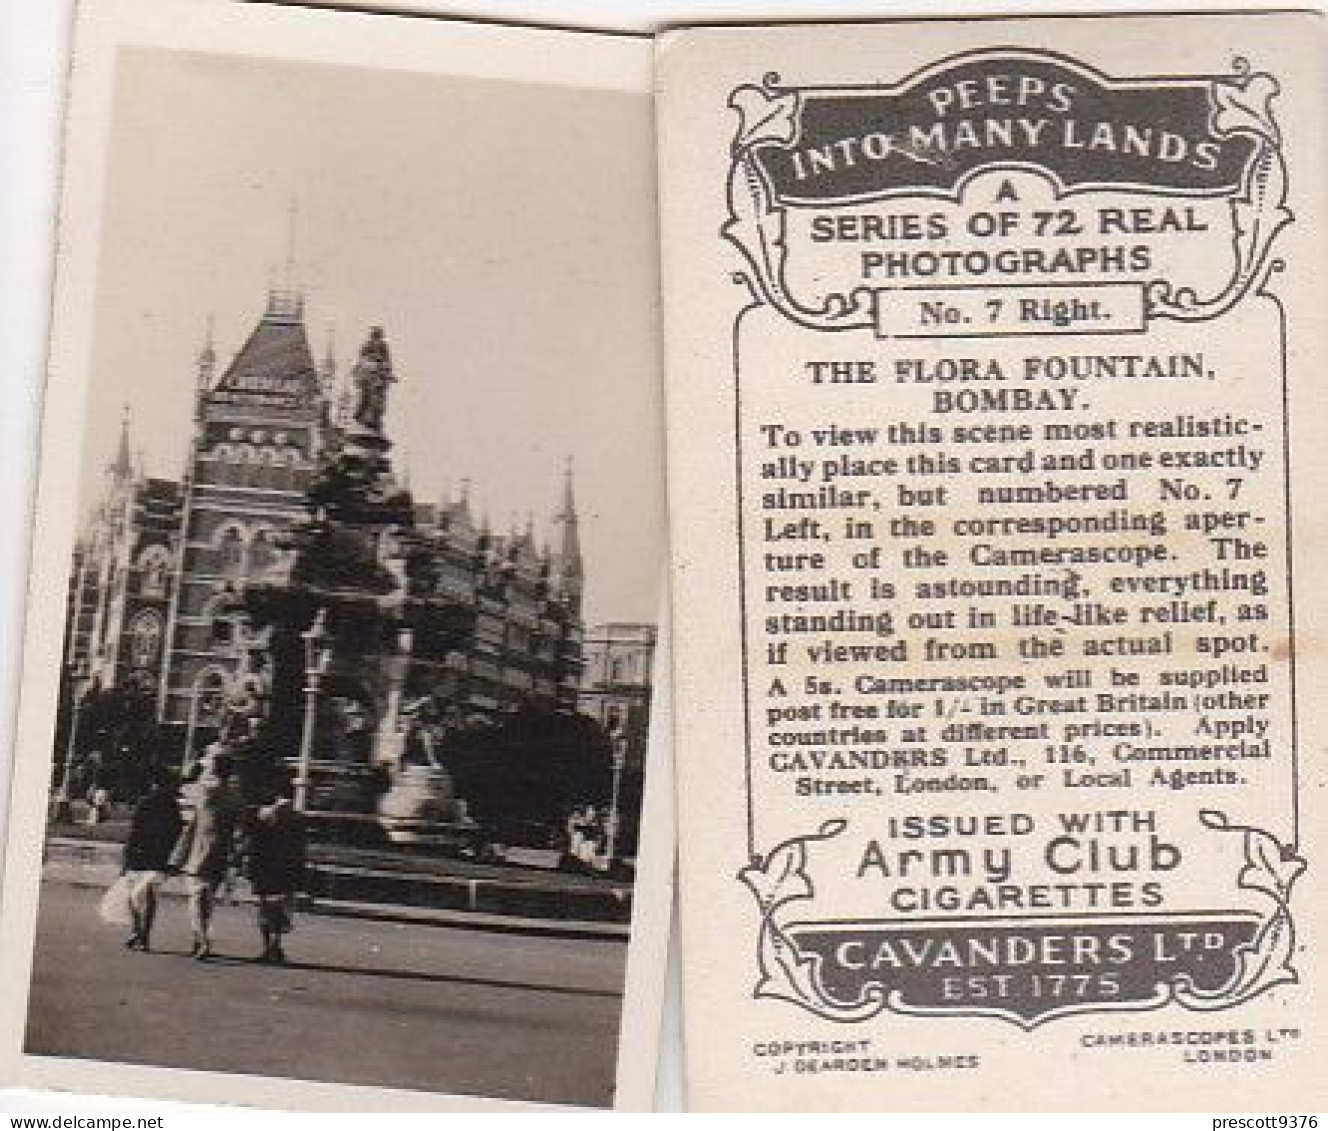 7 Flora Fountain, Bombay  - PEEPS INTO MANY LANDS A 1927 - Cavenders RP Stereoscope Cards 3x6cm - Stereoscopes - Side-by-side Viewers